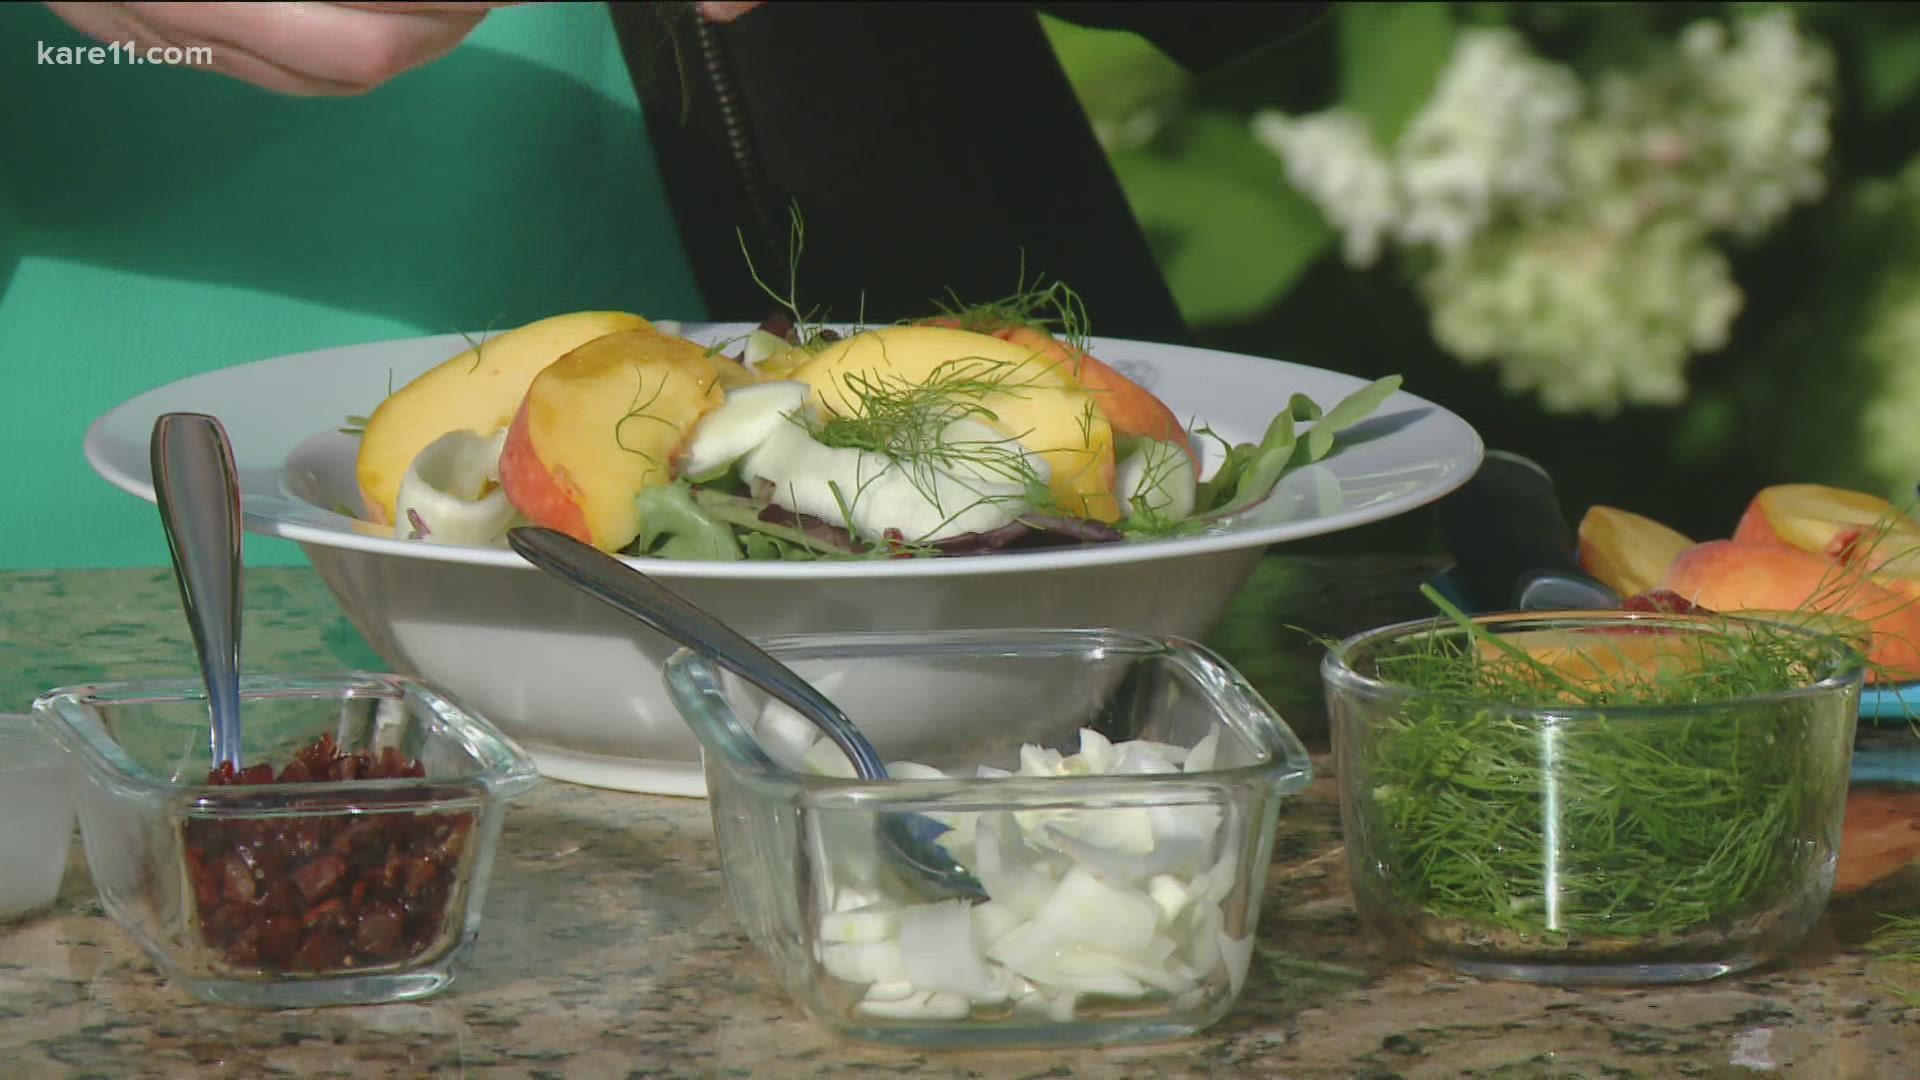 It's summertime, and that means fresh peaches! Here's a fun way to prepare them.